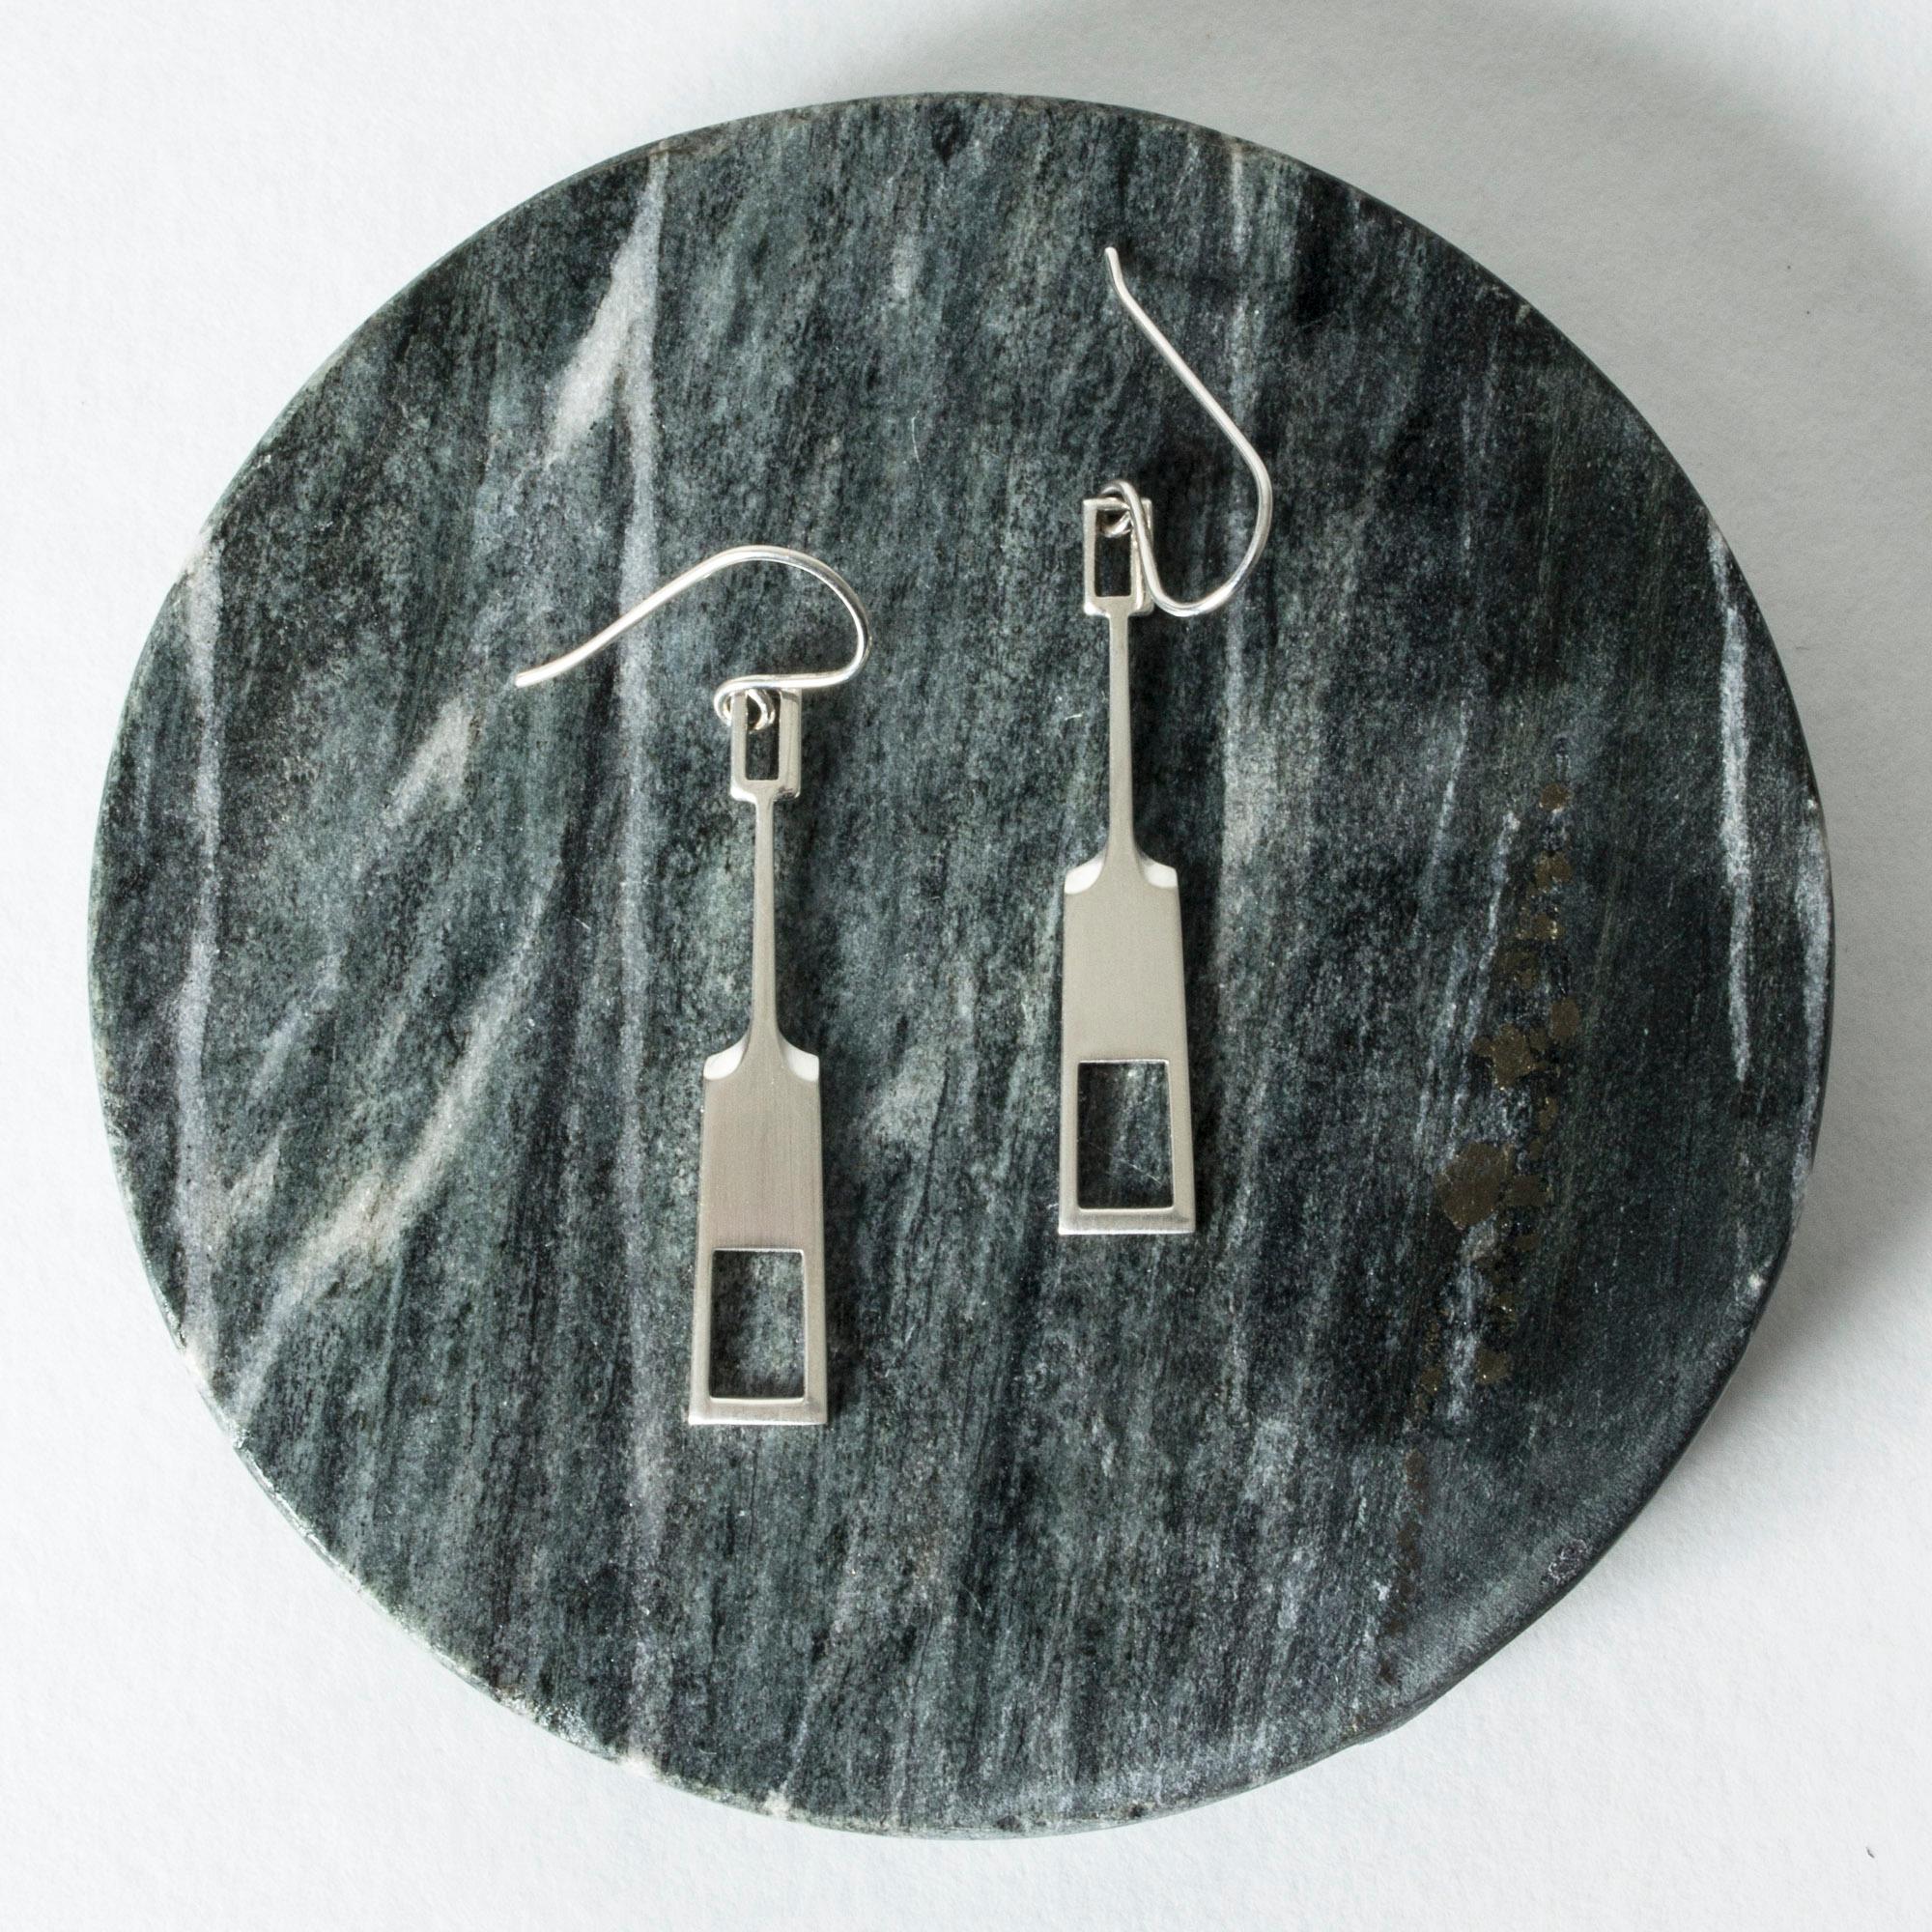 Pair of amazing silver earrings by Tone Vigeland in a cool, modernist design. Easy to wear pieces that stand out.